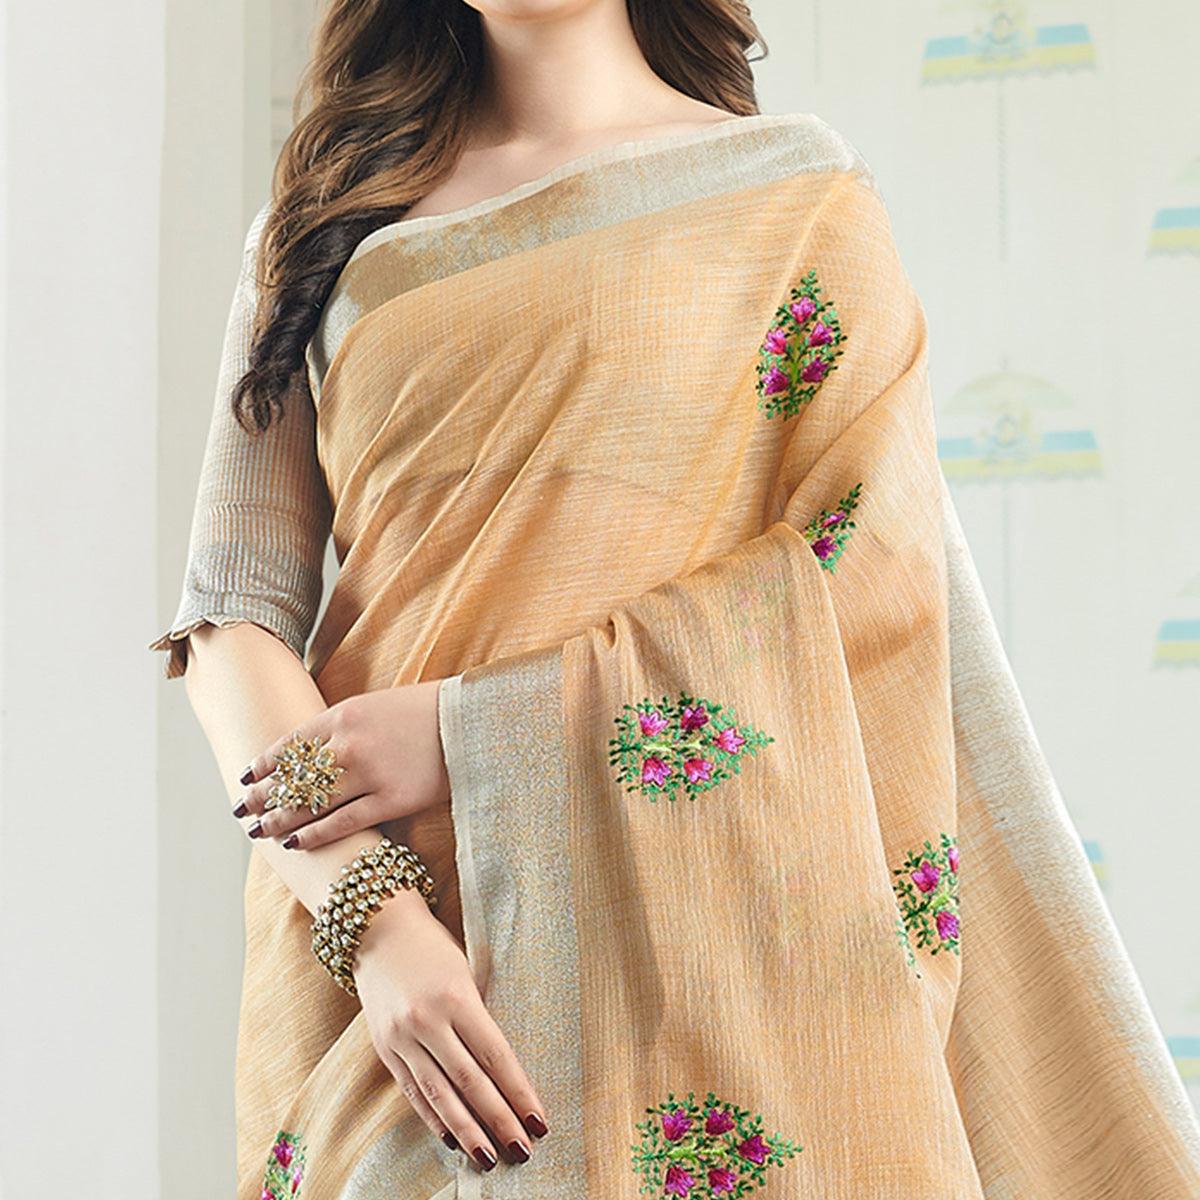 Adorable Light Peach Colored Casual Wear Floral Embroidered Linen-Cotton Saree With Tassels - Peachmode